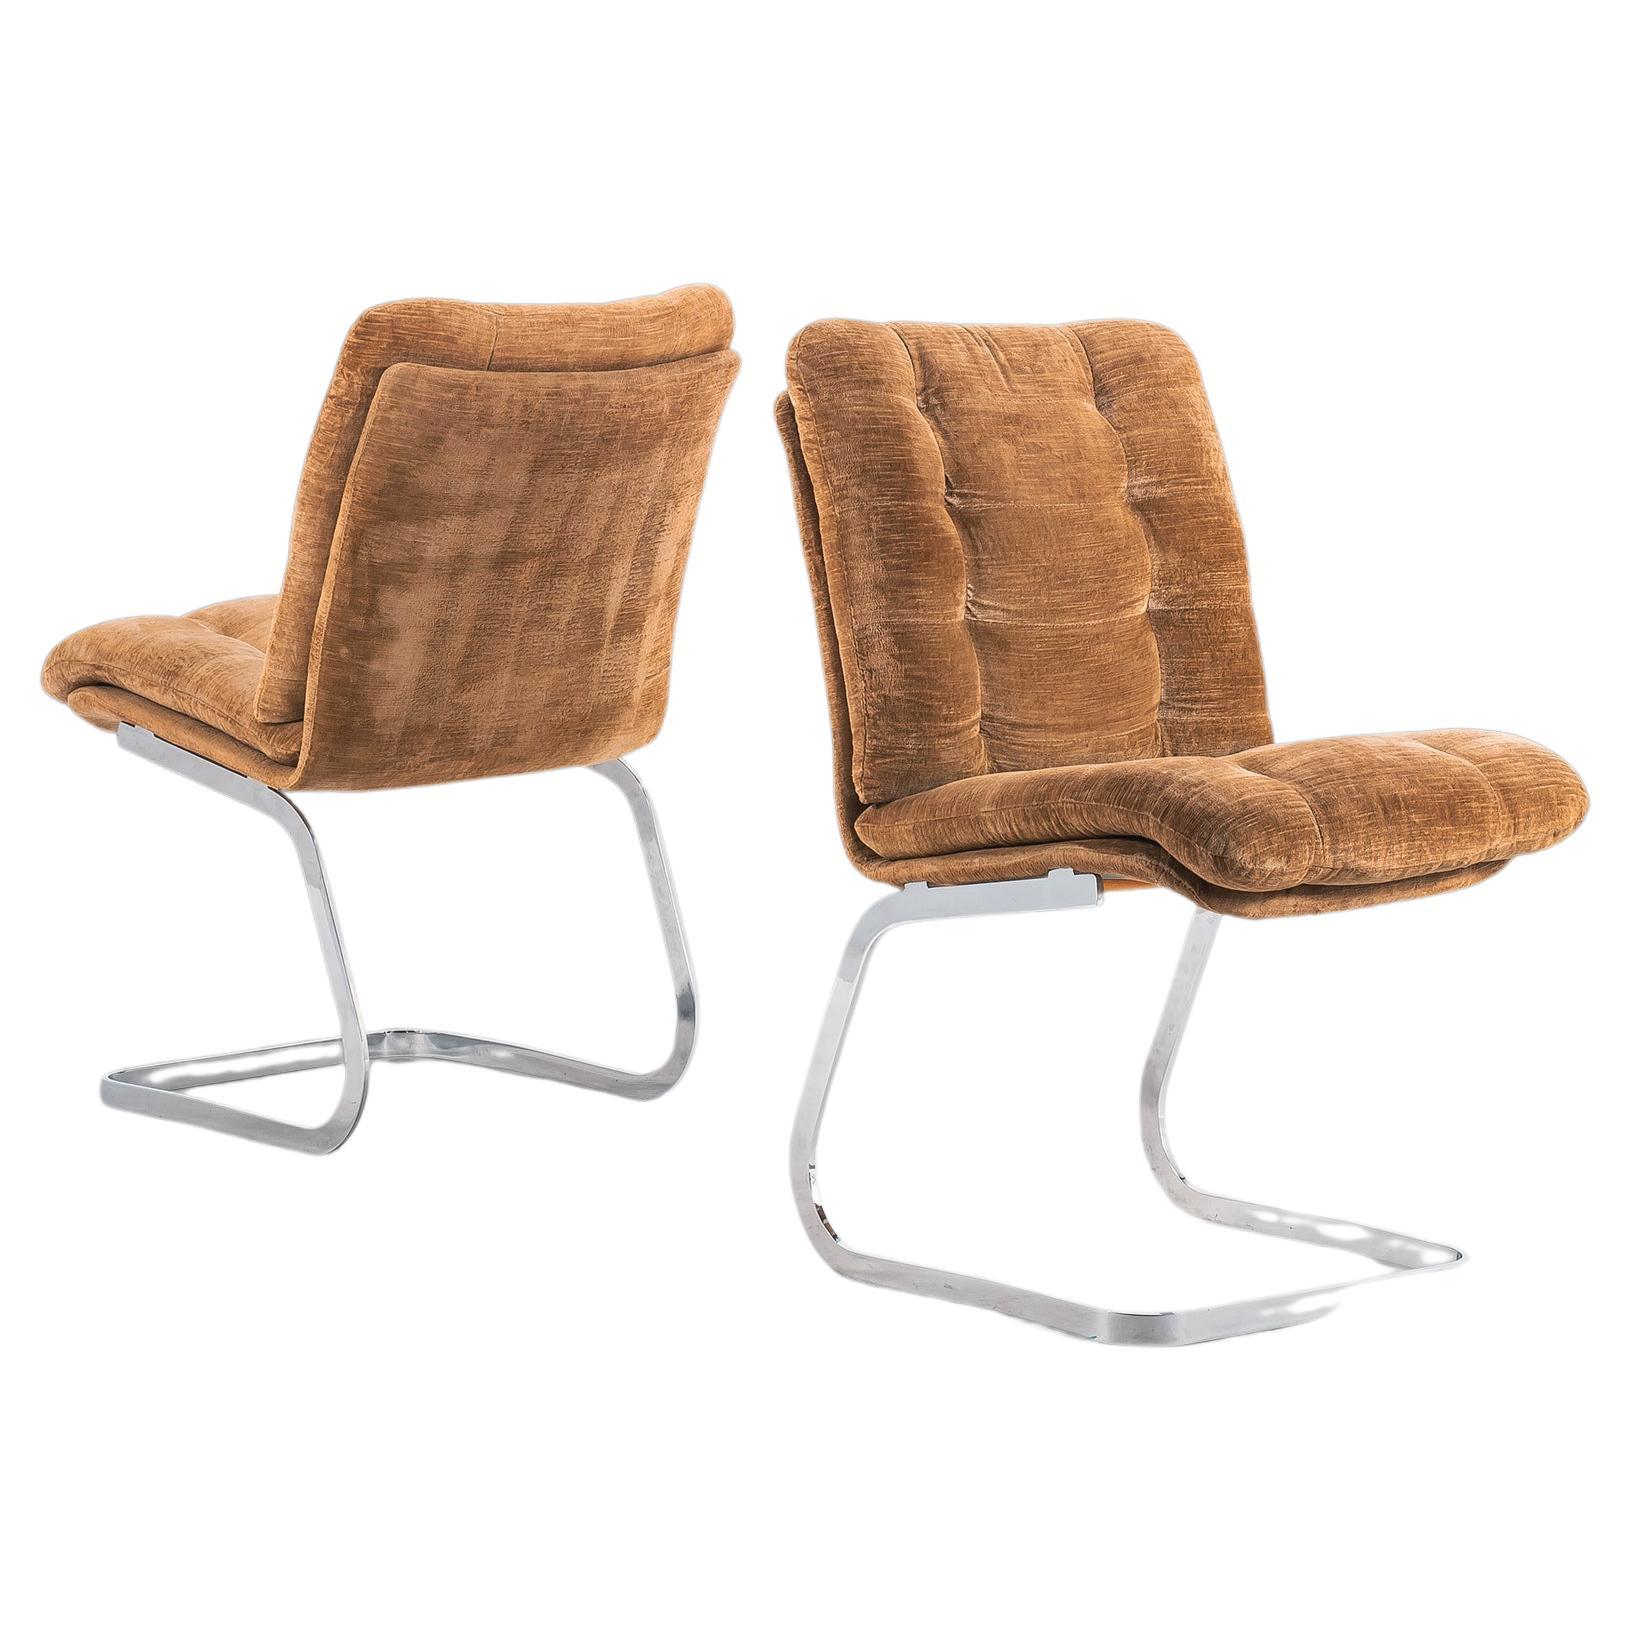 Set of Two '2' Mid Century Cantilever Chairs by Roche Bobois, France, c. 1970's